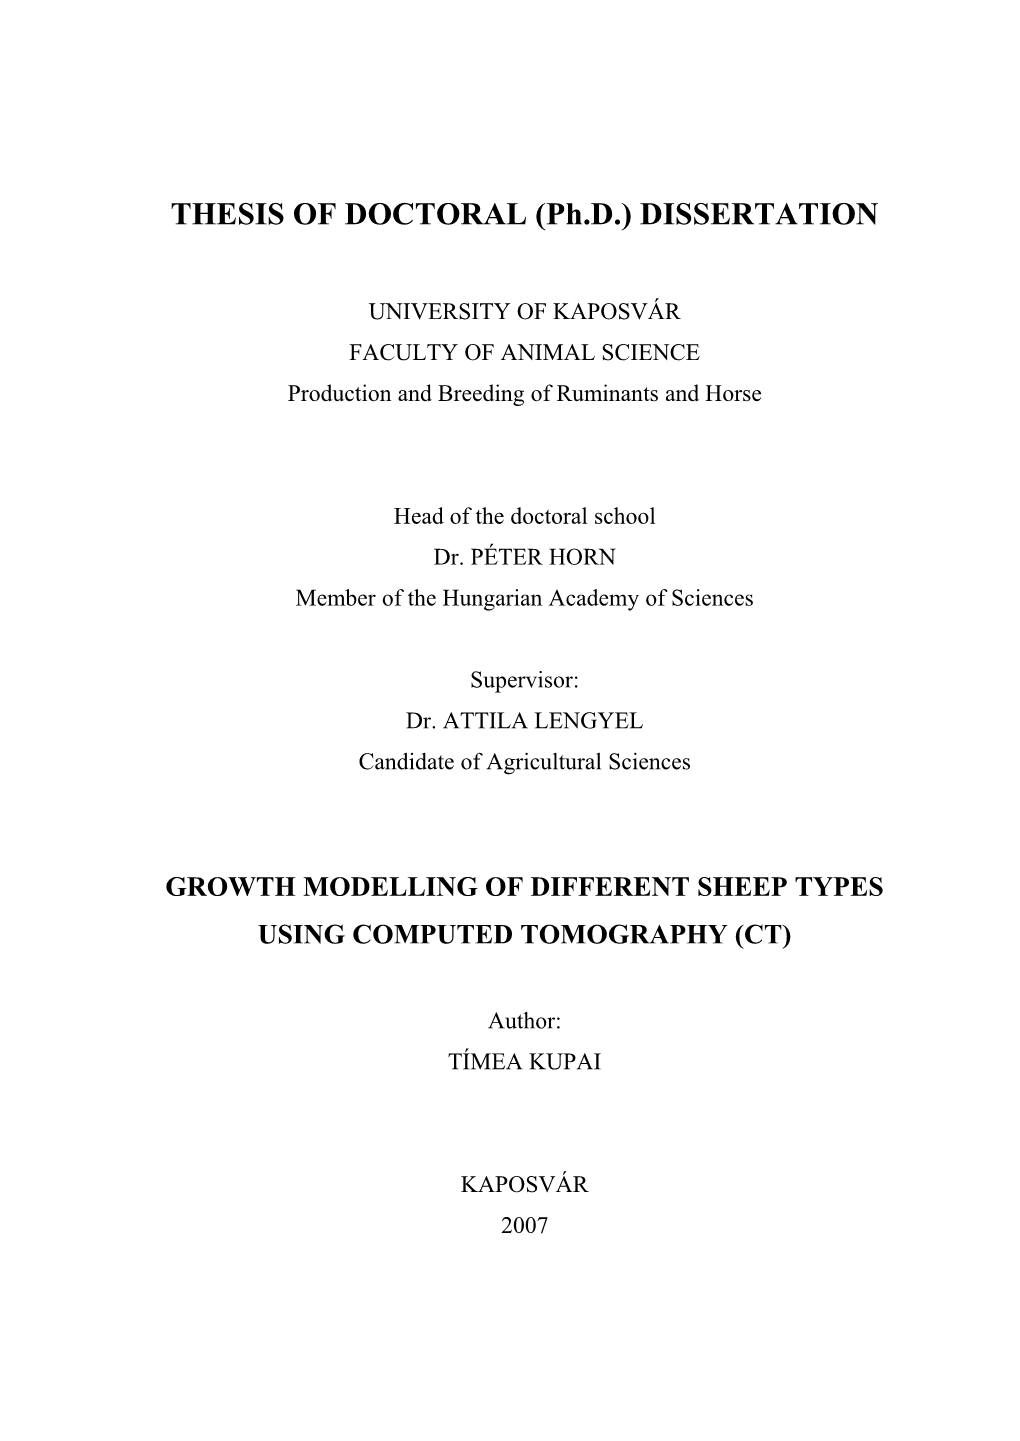 THESIS of DOCTORAL (Ph